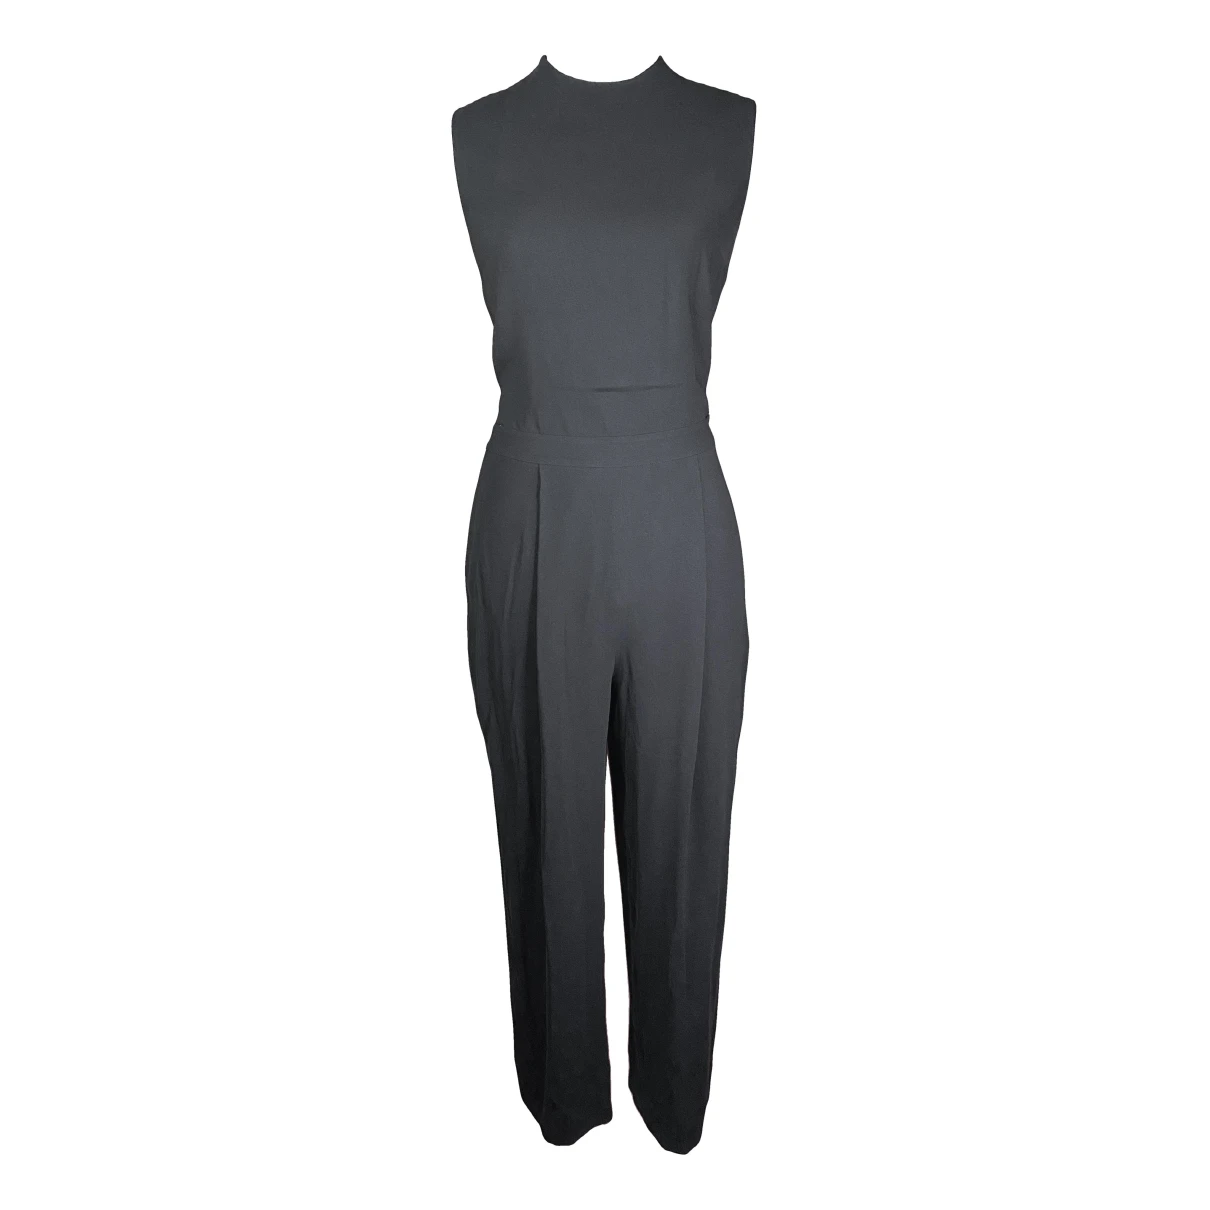 clothing Diane Von Furstenberg jumpsuits for Female Polyester 4 US. Used condition